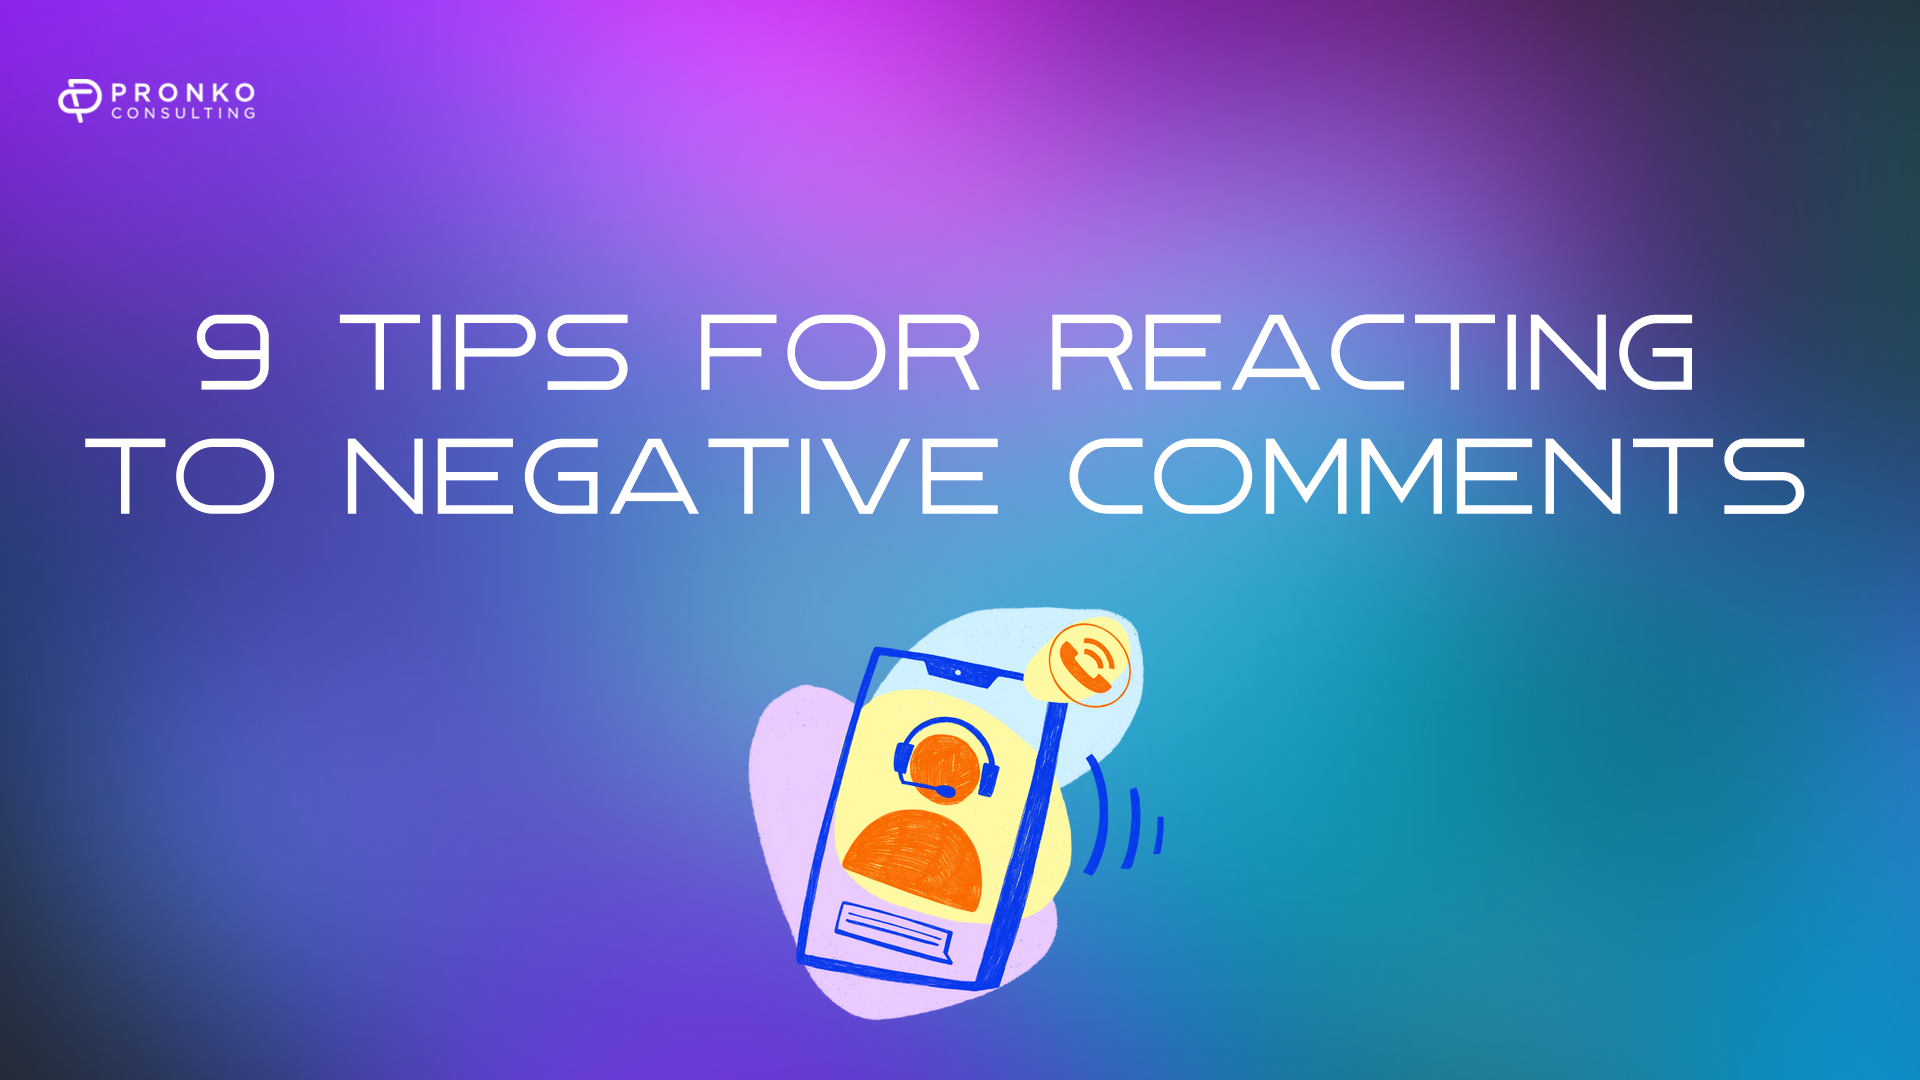 How to deal with negative reviews and comments